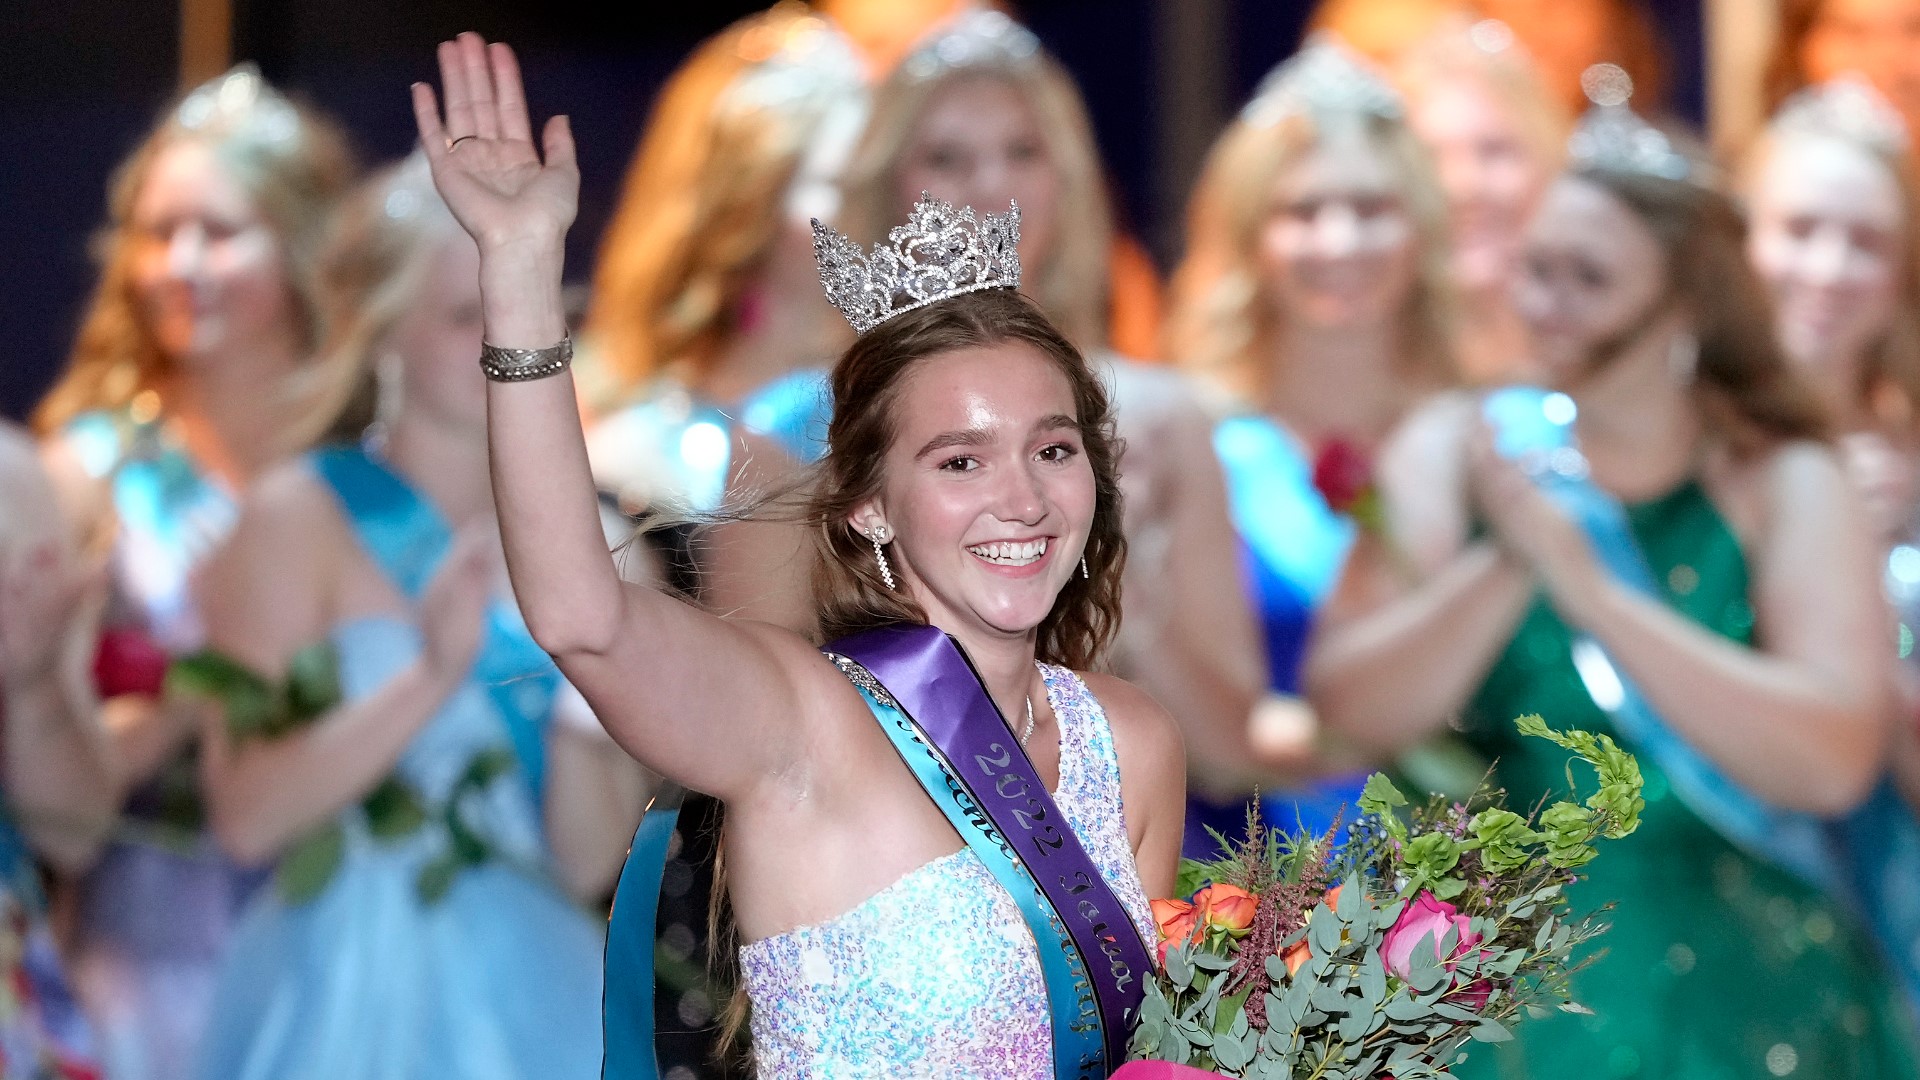 Fox was chosen out more than 100 competitors across the state of Iowa. She is the 58th State Fair Queen in Iowa history.